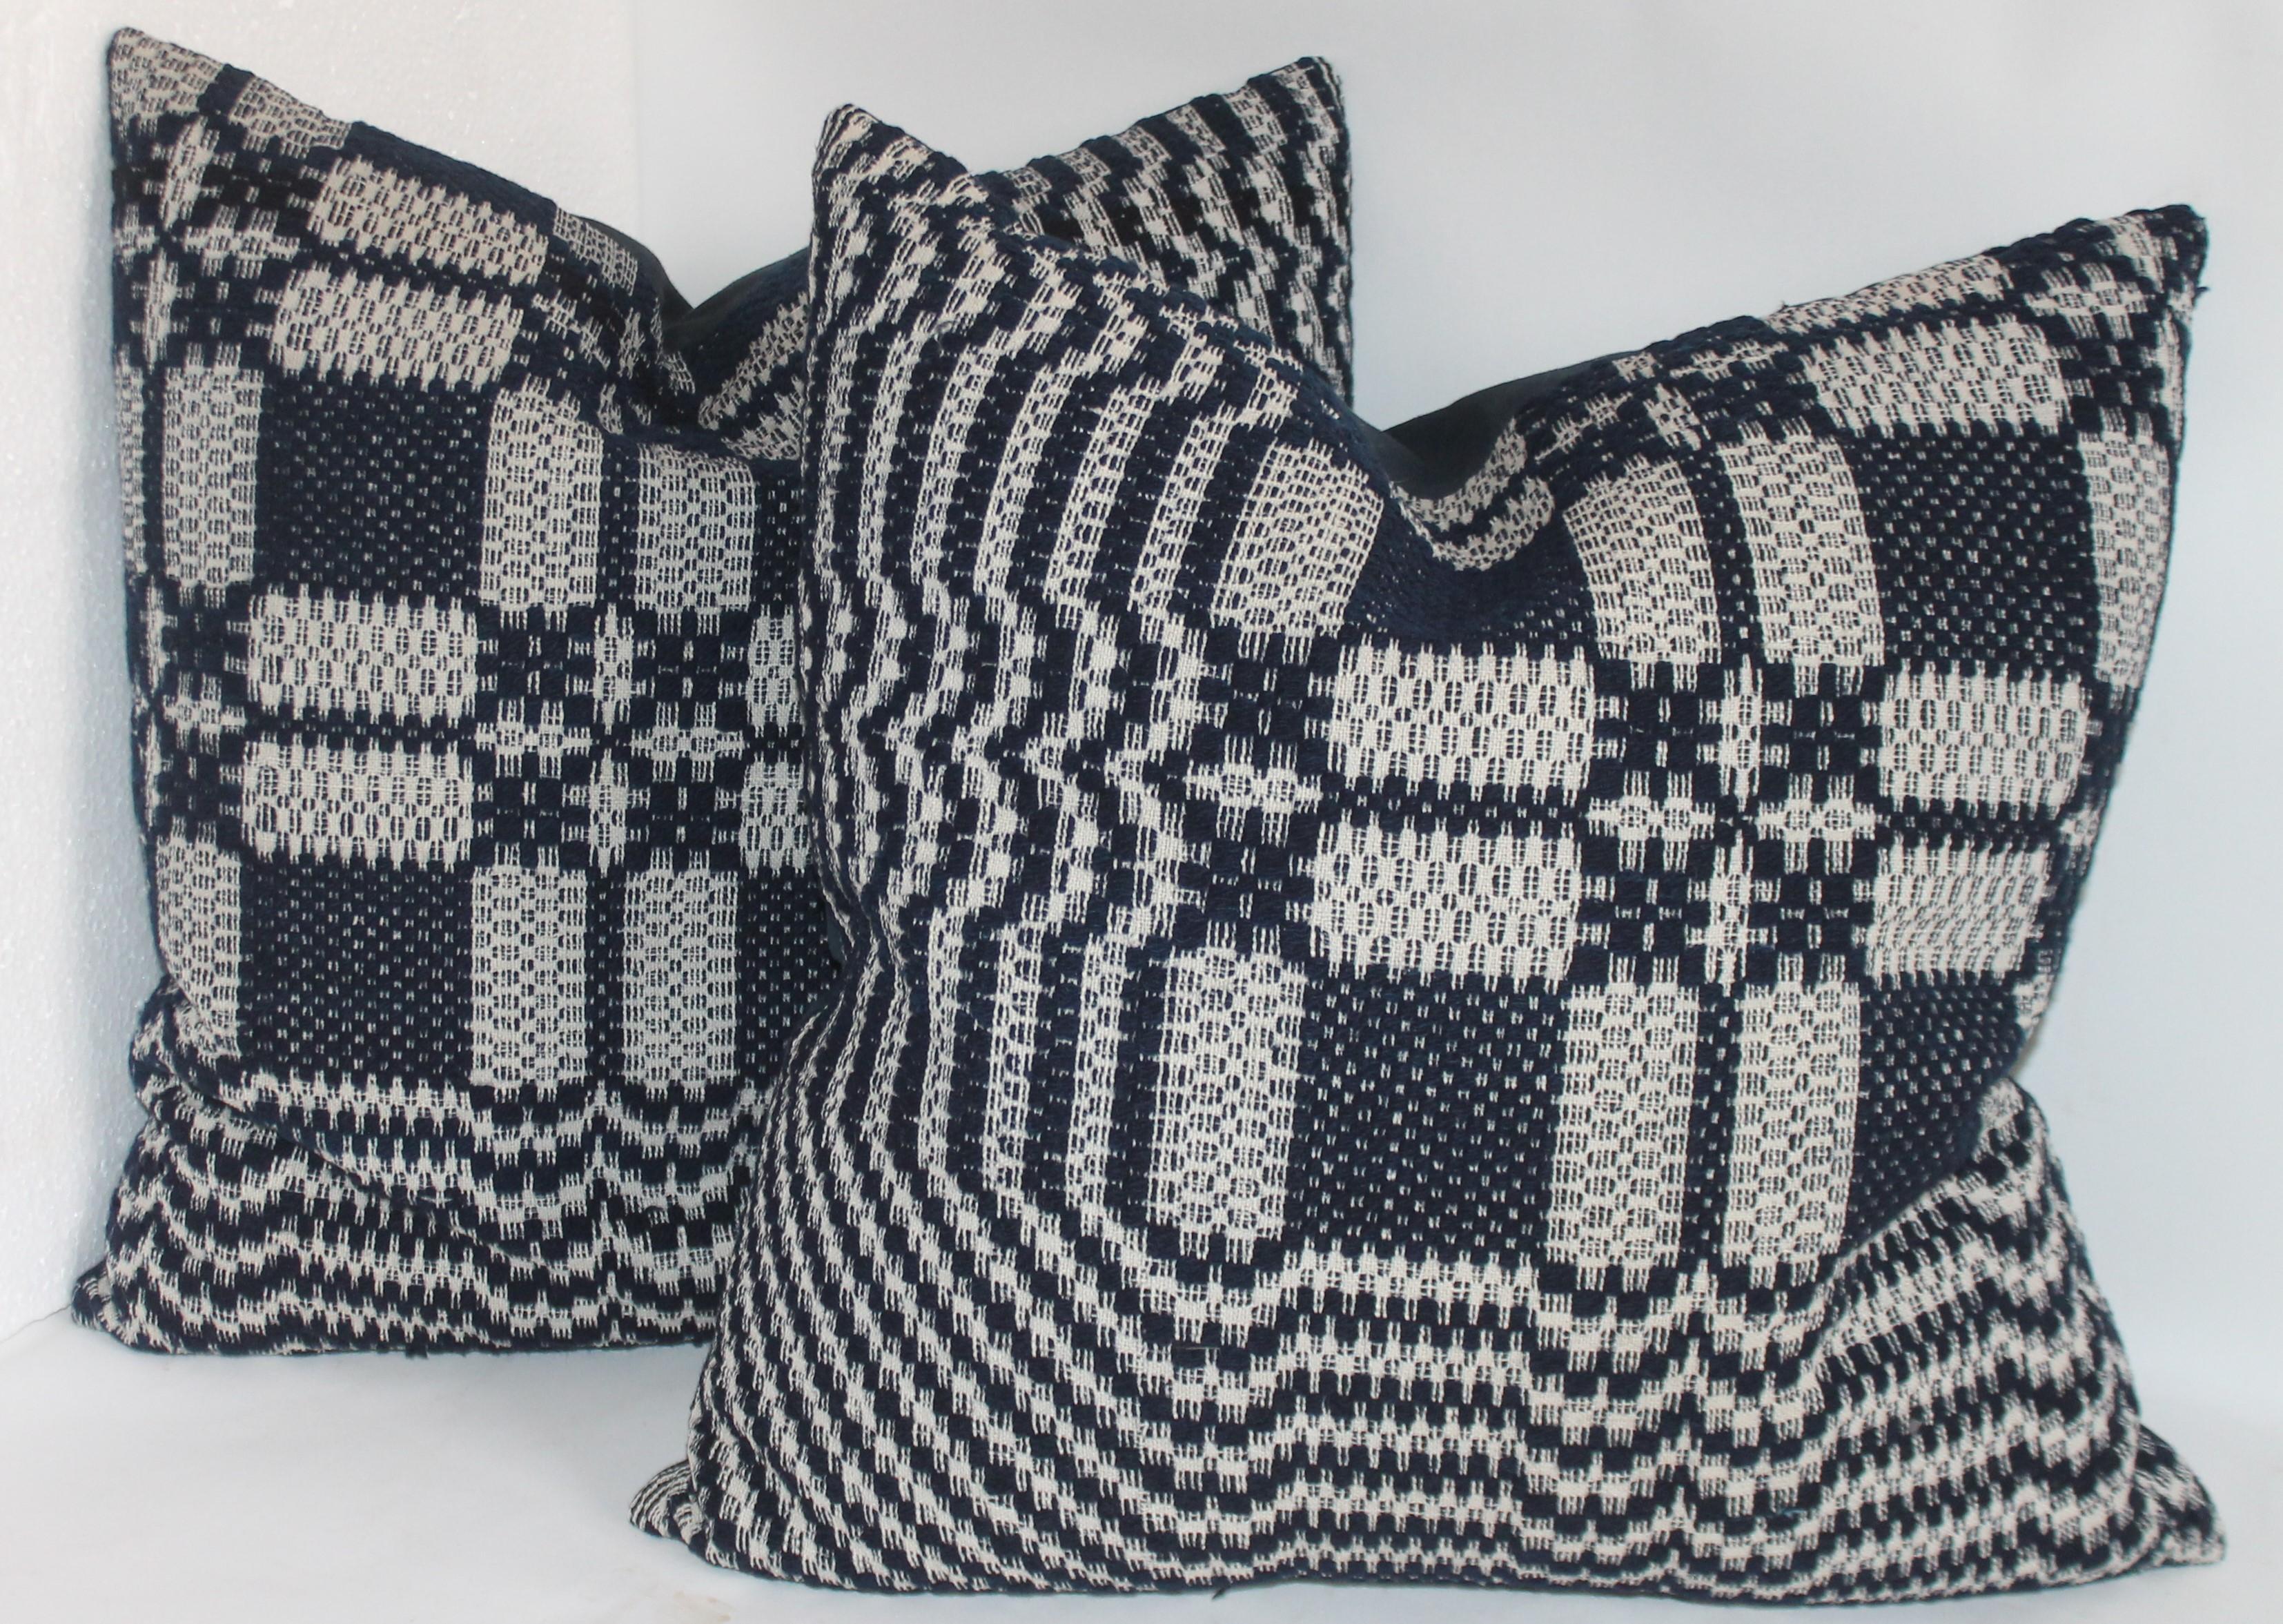 These four jacquard coverlet pillows are in fantastic condition and have blue cotton linen backings. The inserts are down and feather fill.